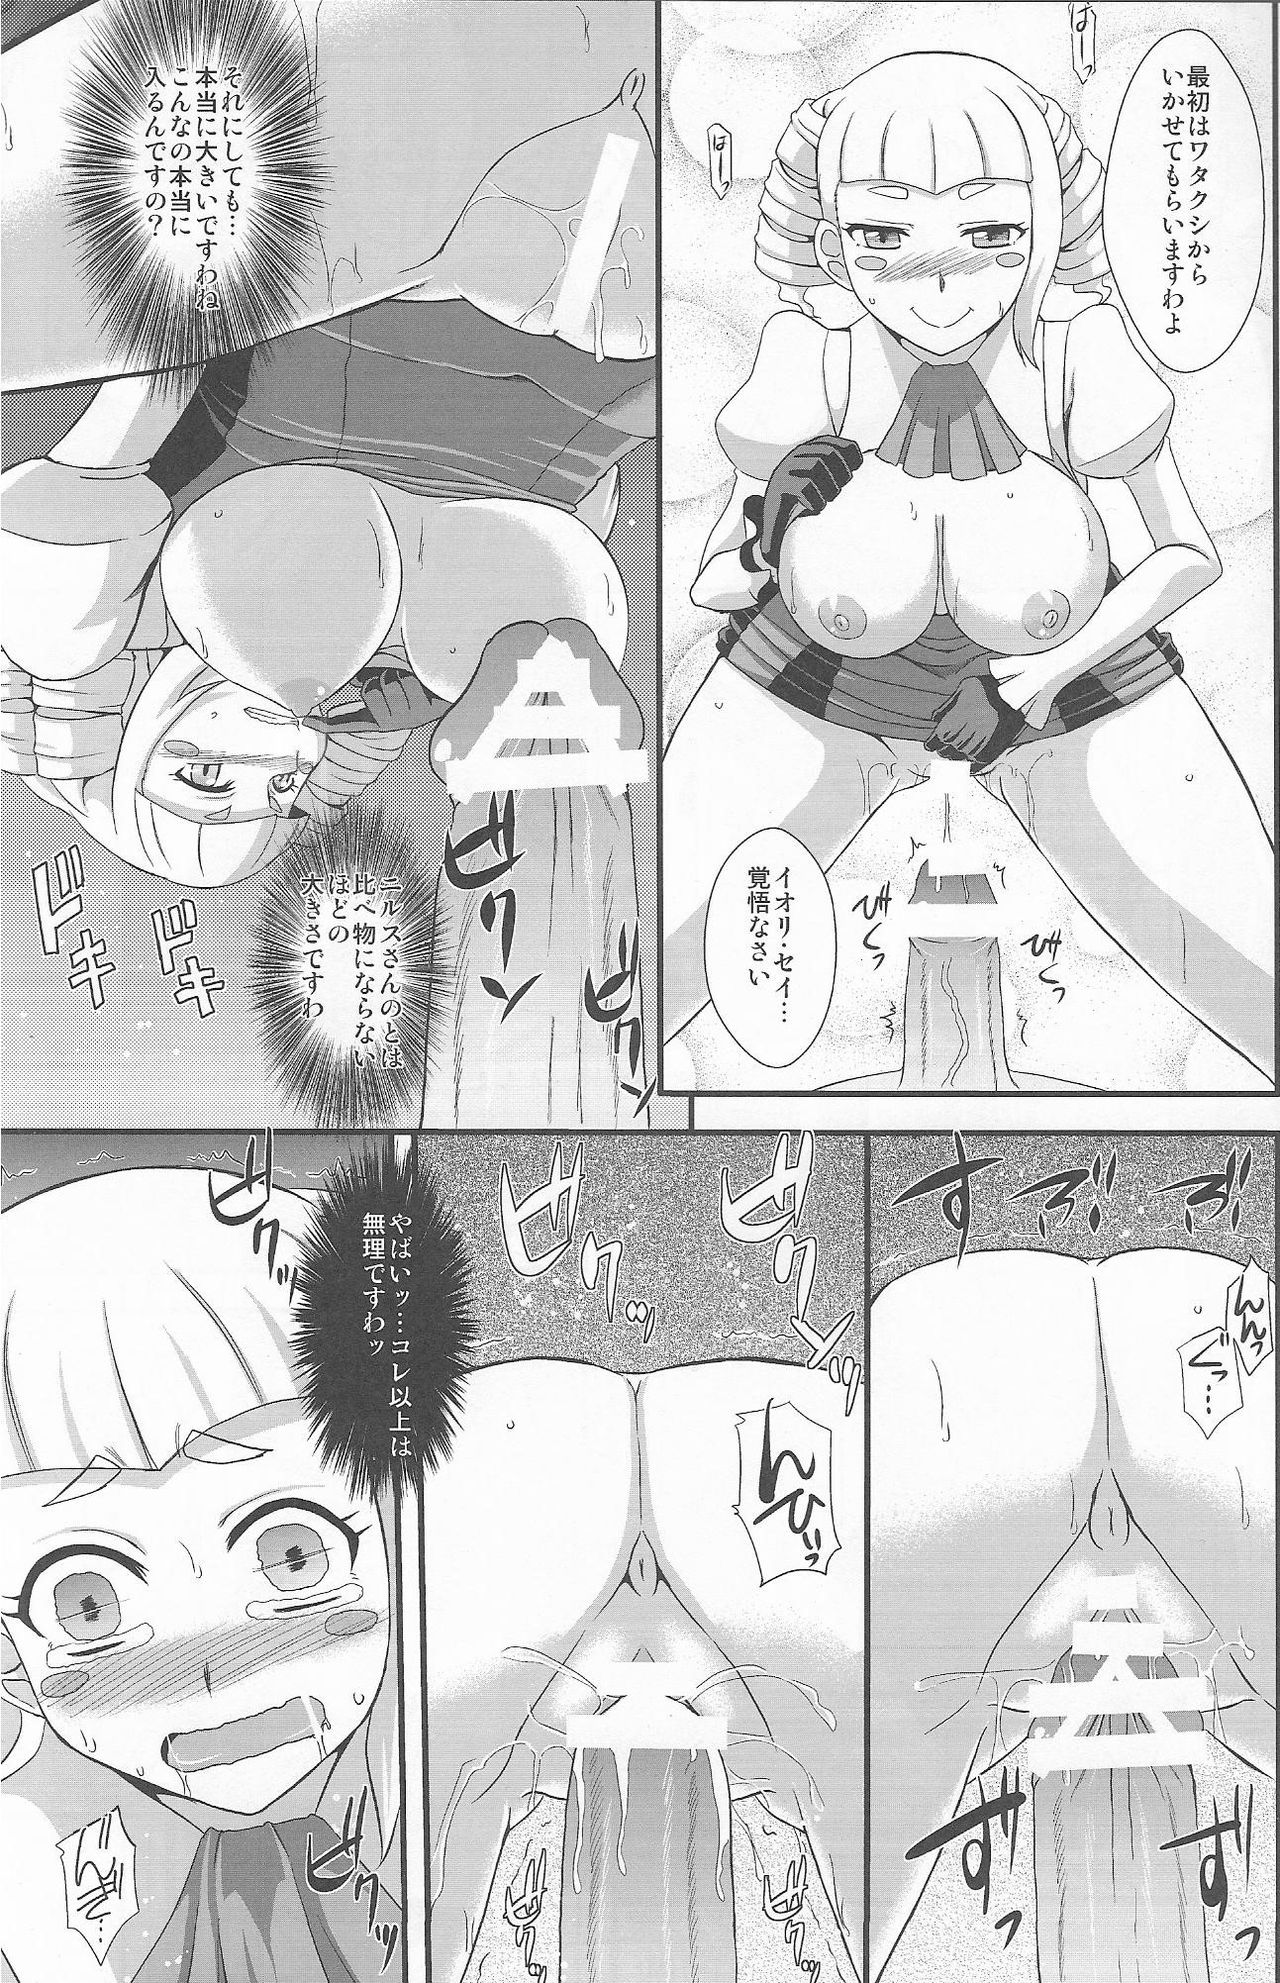 (CT23) [Take Out (Zeros)] SEX FIGHTERS (Gundam Build Fighters) page 8 full